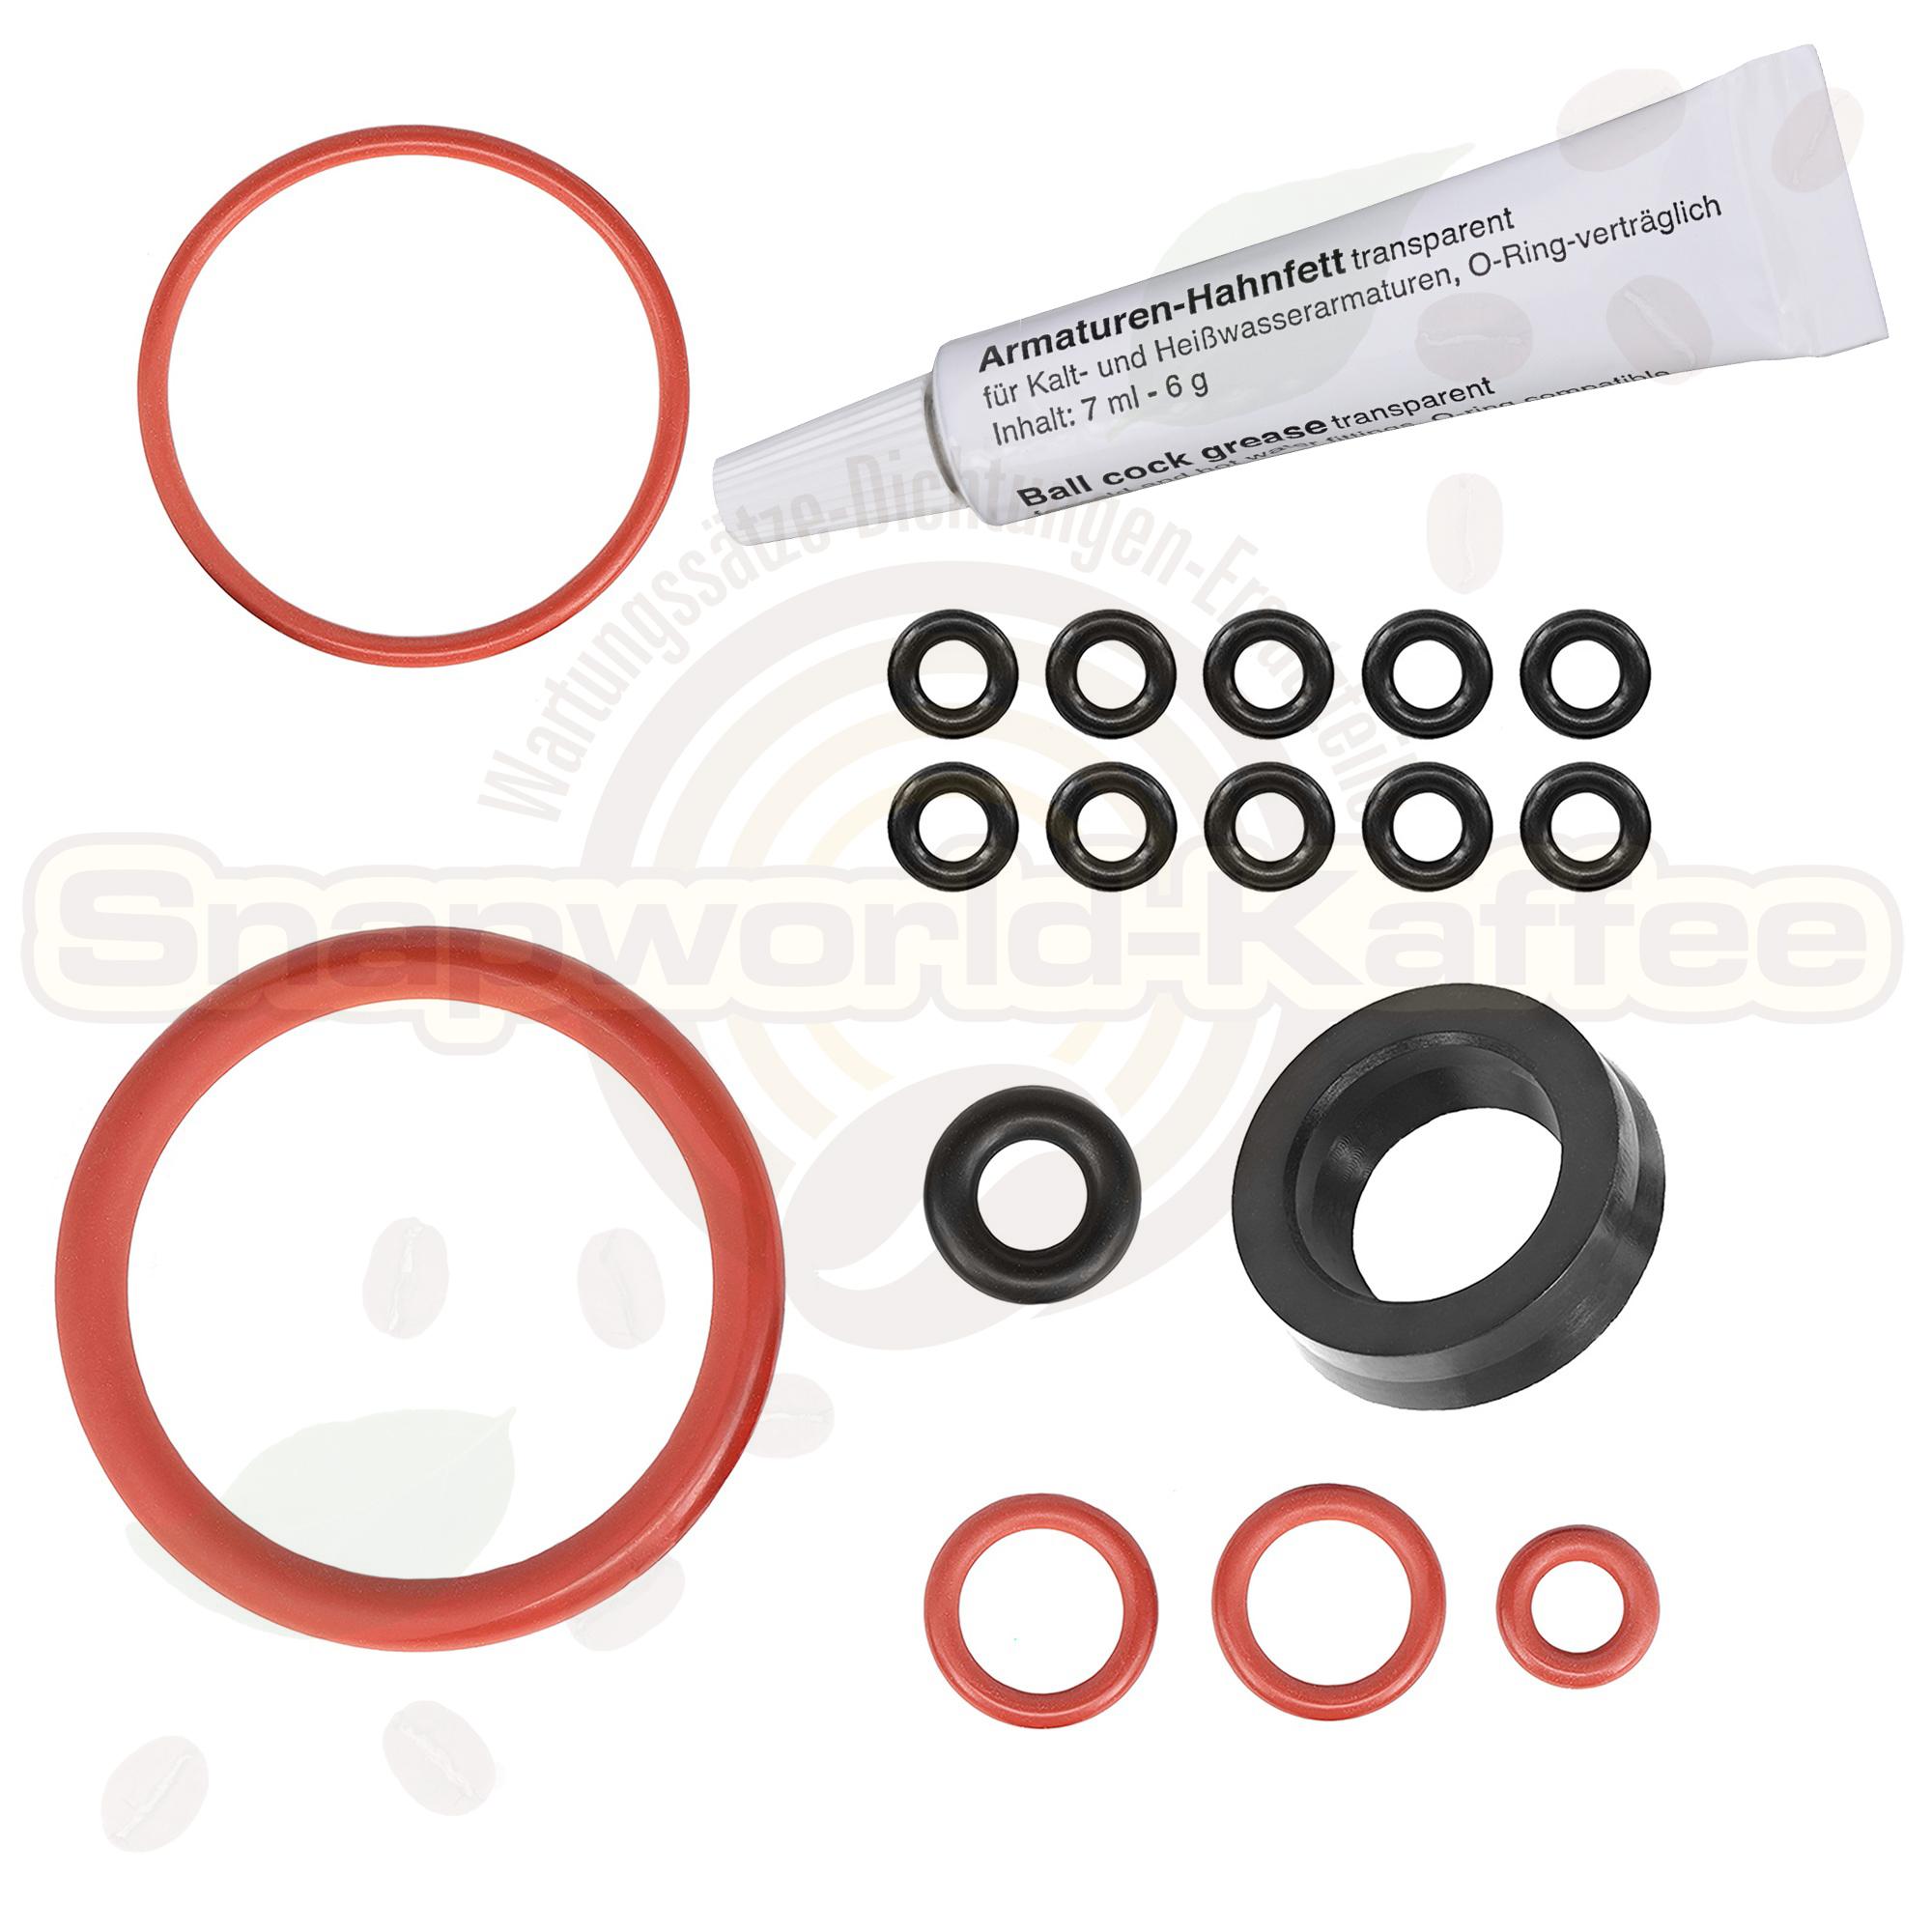 Seal o-Ring for Saeco Miele Sup Cva For Brew Group Leak Clip Wasserank